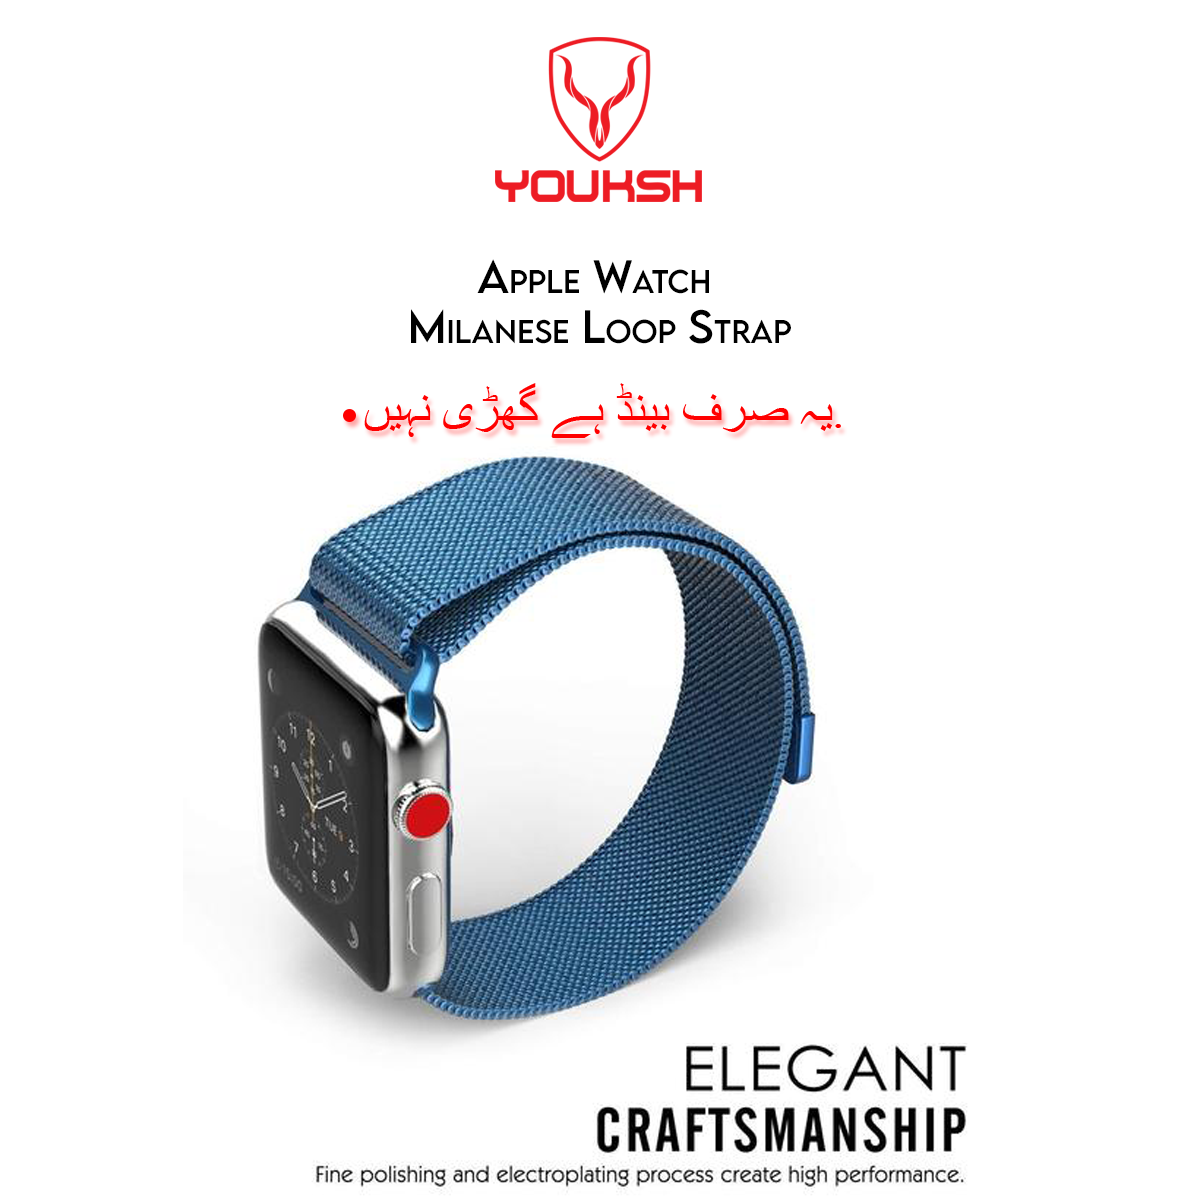 YOUKSH Apple Watch - Milanese Stainless Steel - Strap - 42mm/44mm, For Apple Watch Series 1/2/3/4/5/6.